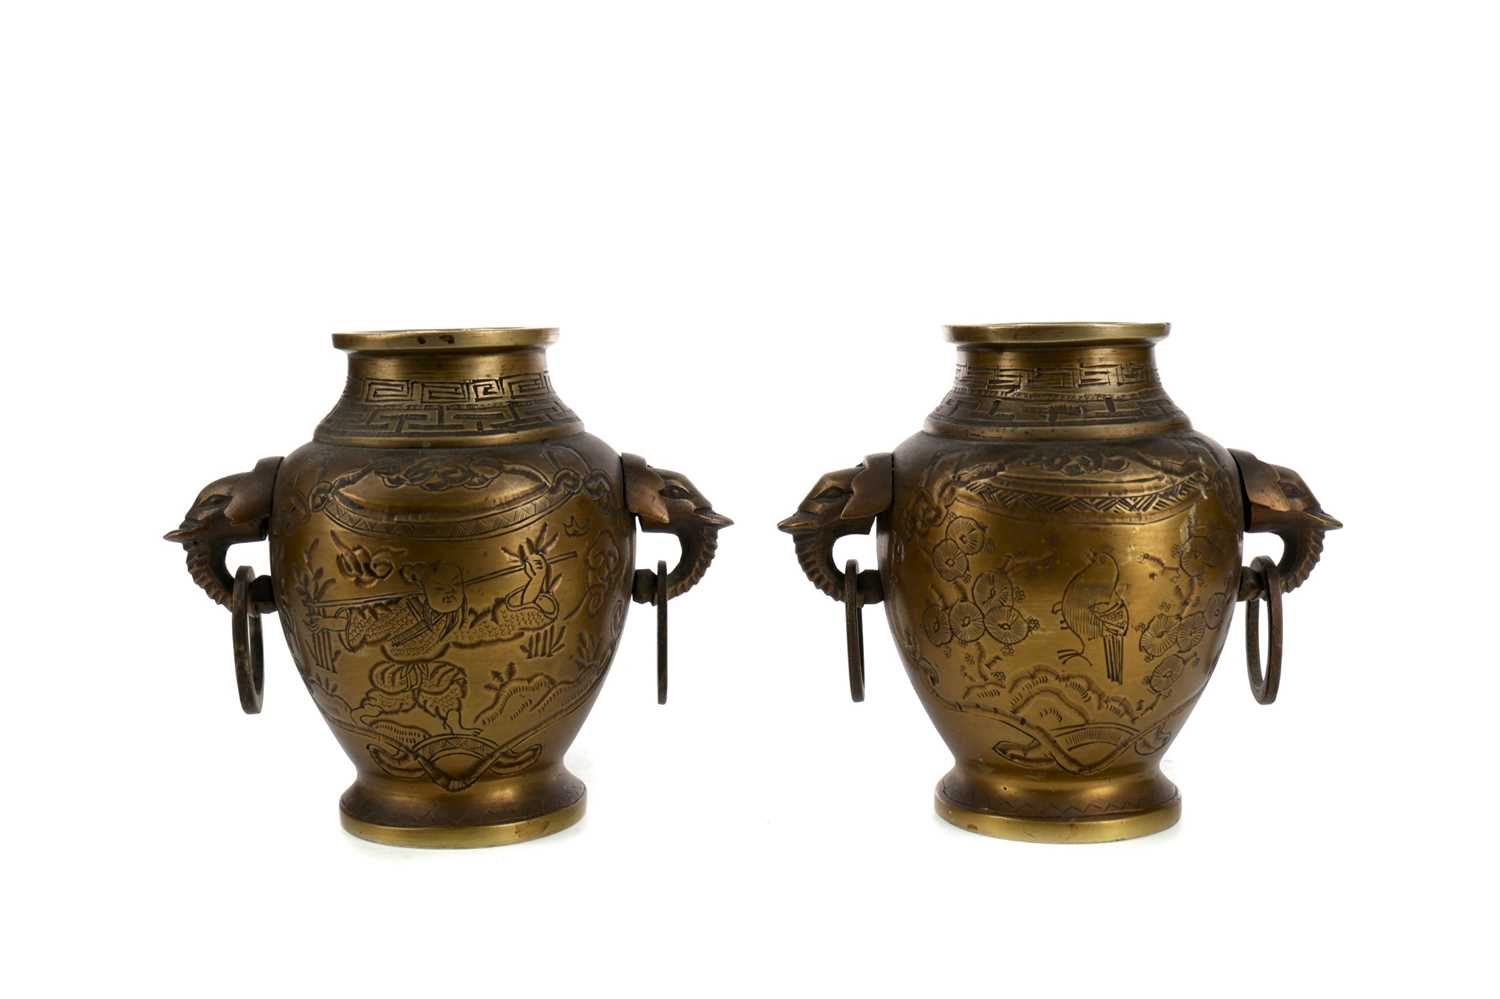 Lot 714 - A PAIR OF EARLY 20TH CENTURY CHINESE BRONZE VASES